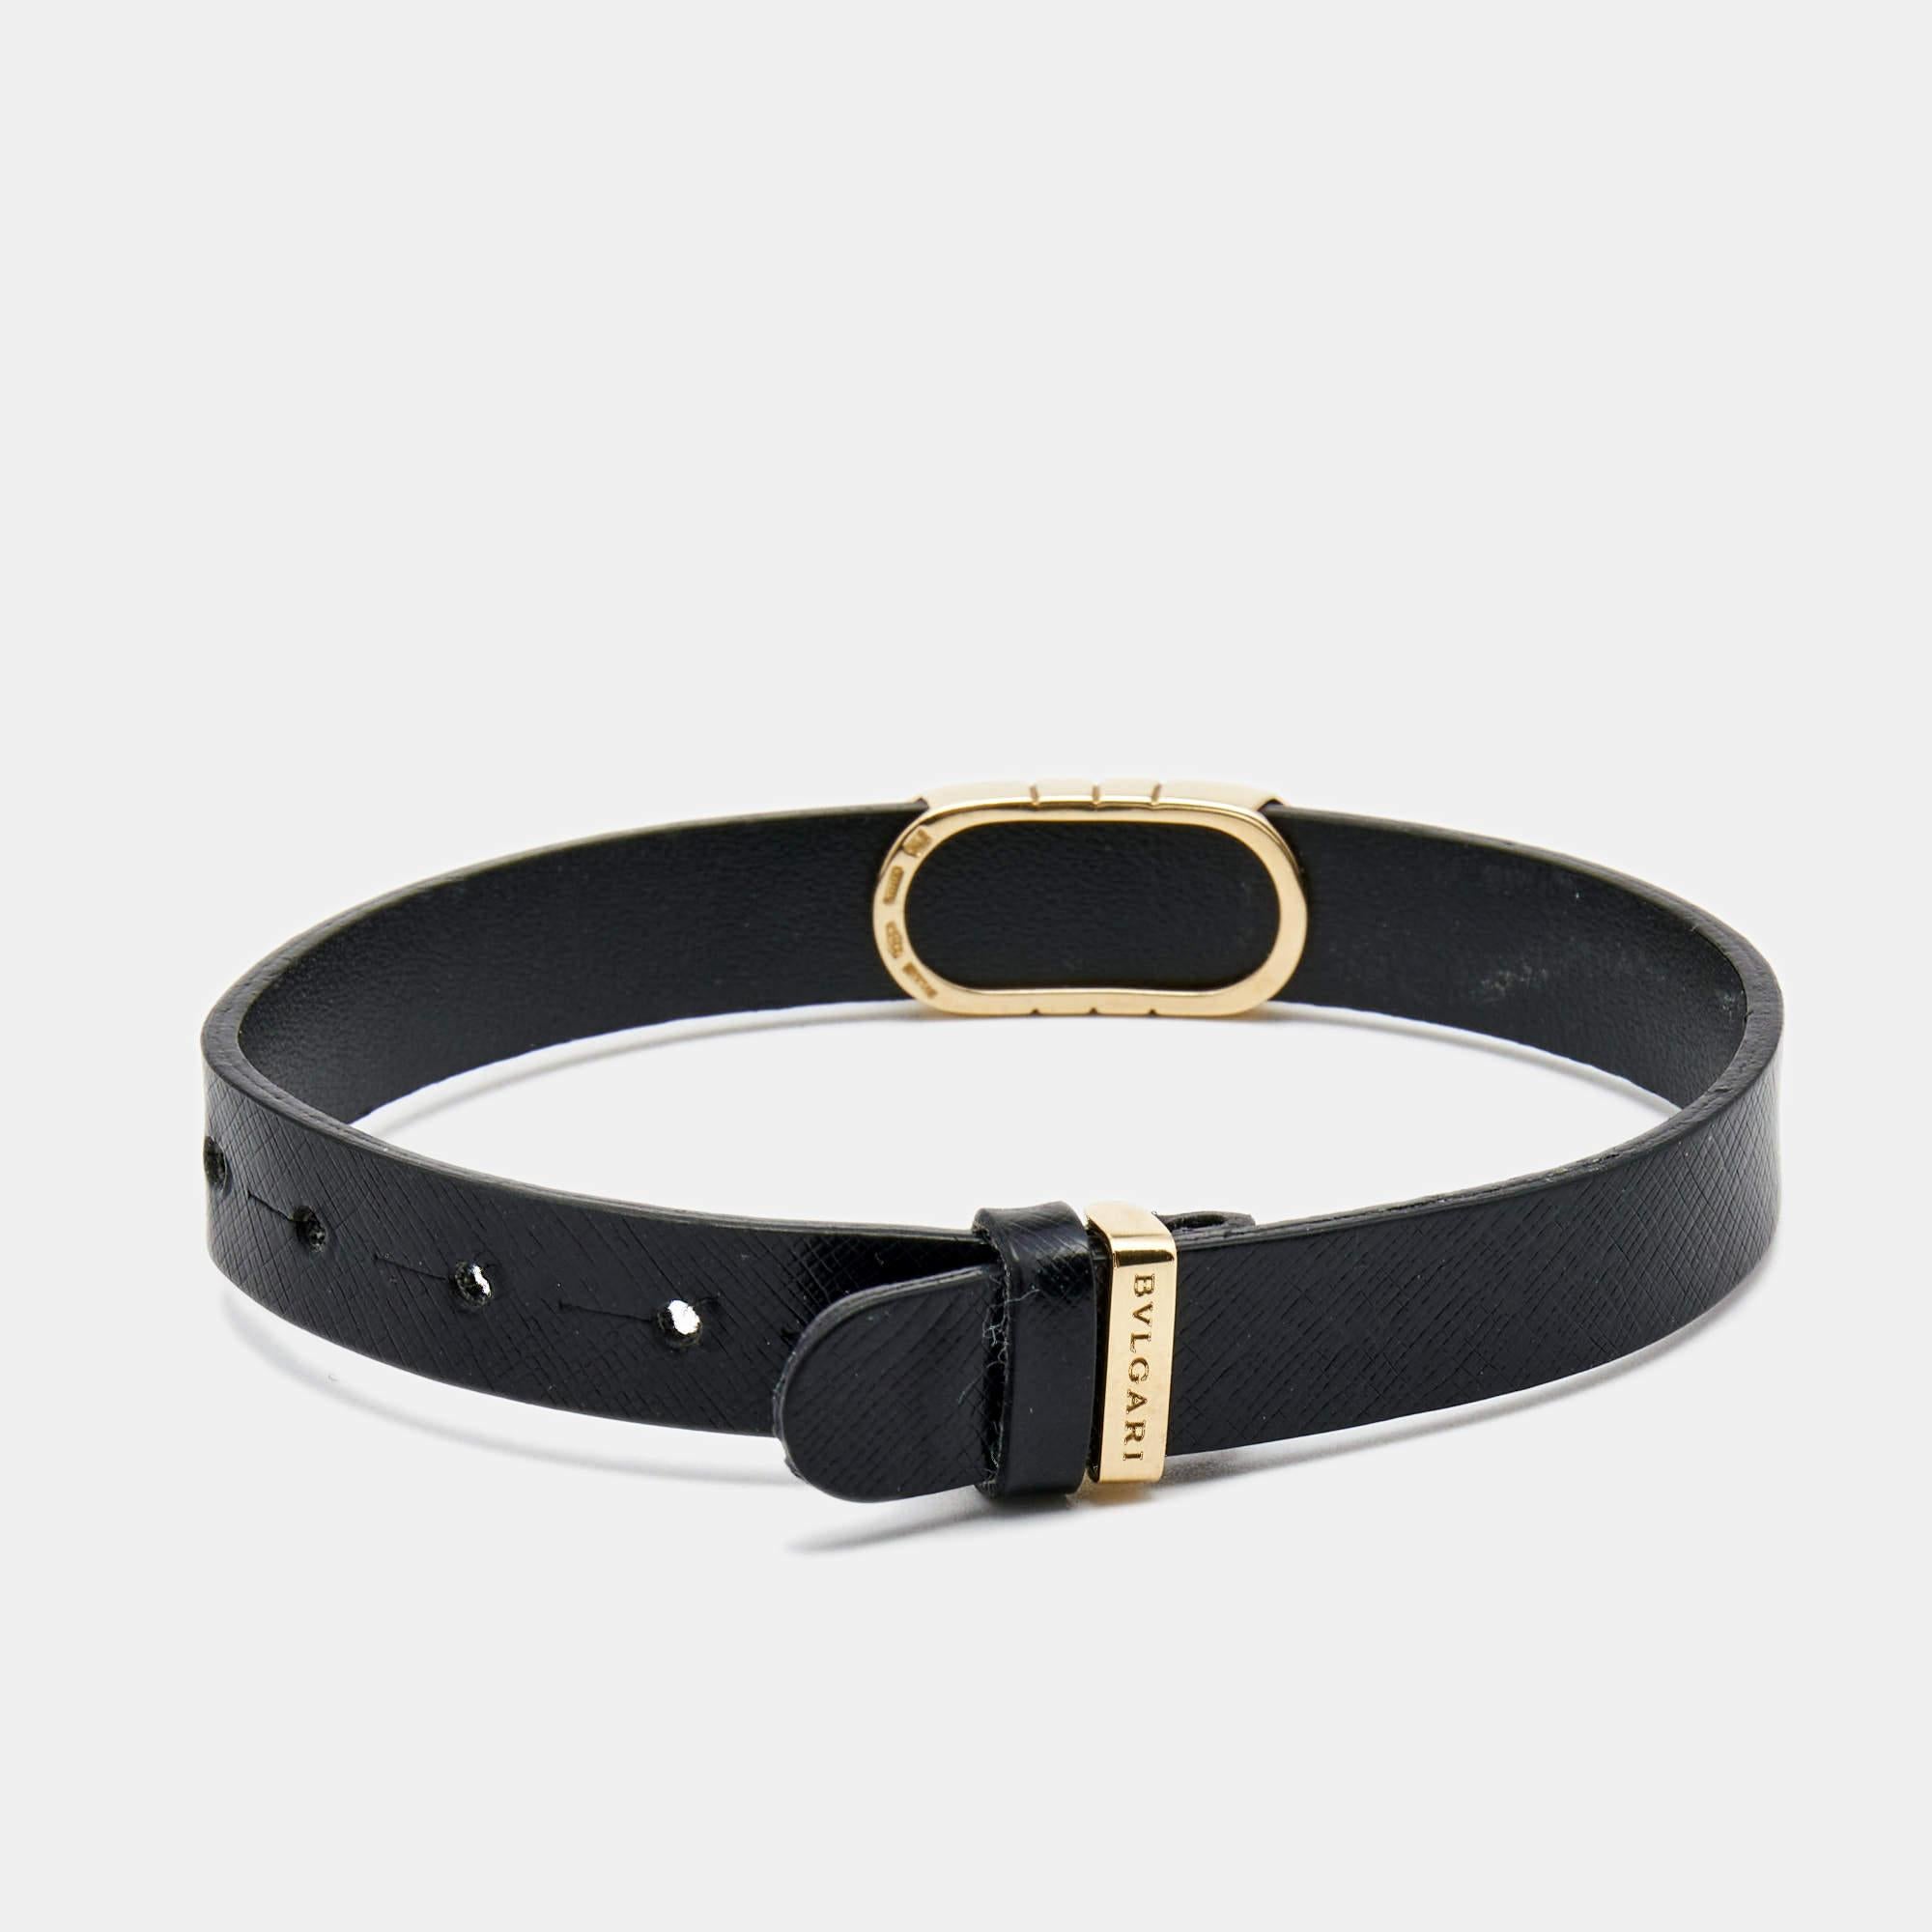 This classy Bvlgari Parentesi unisex bracelet can be worn over and over again once purchased. It will never go out of style. It has a leather strap that holds an 18k yellow gold Parentesi accent. Simple and beautiful.

Includes: Brand Box